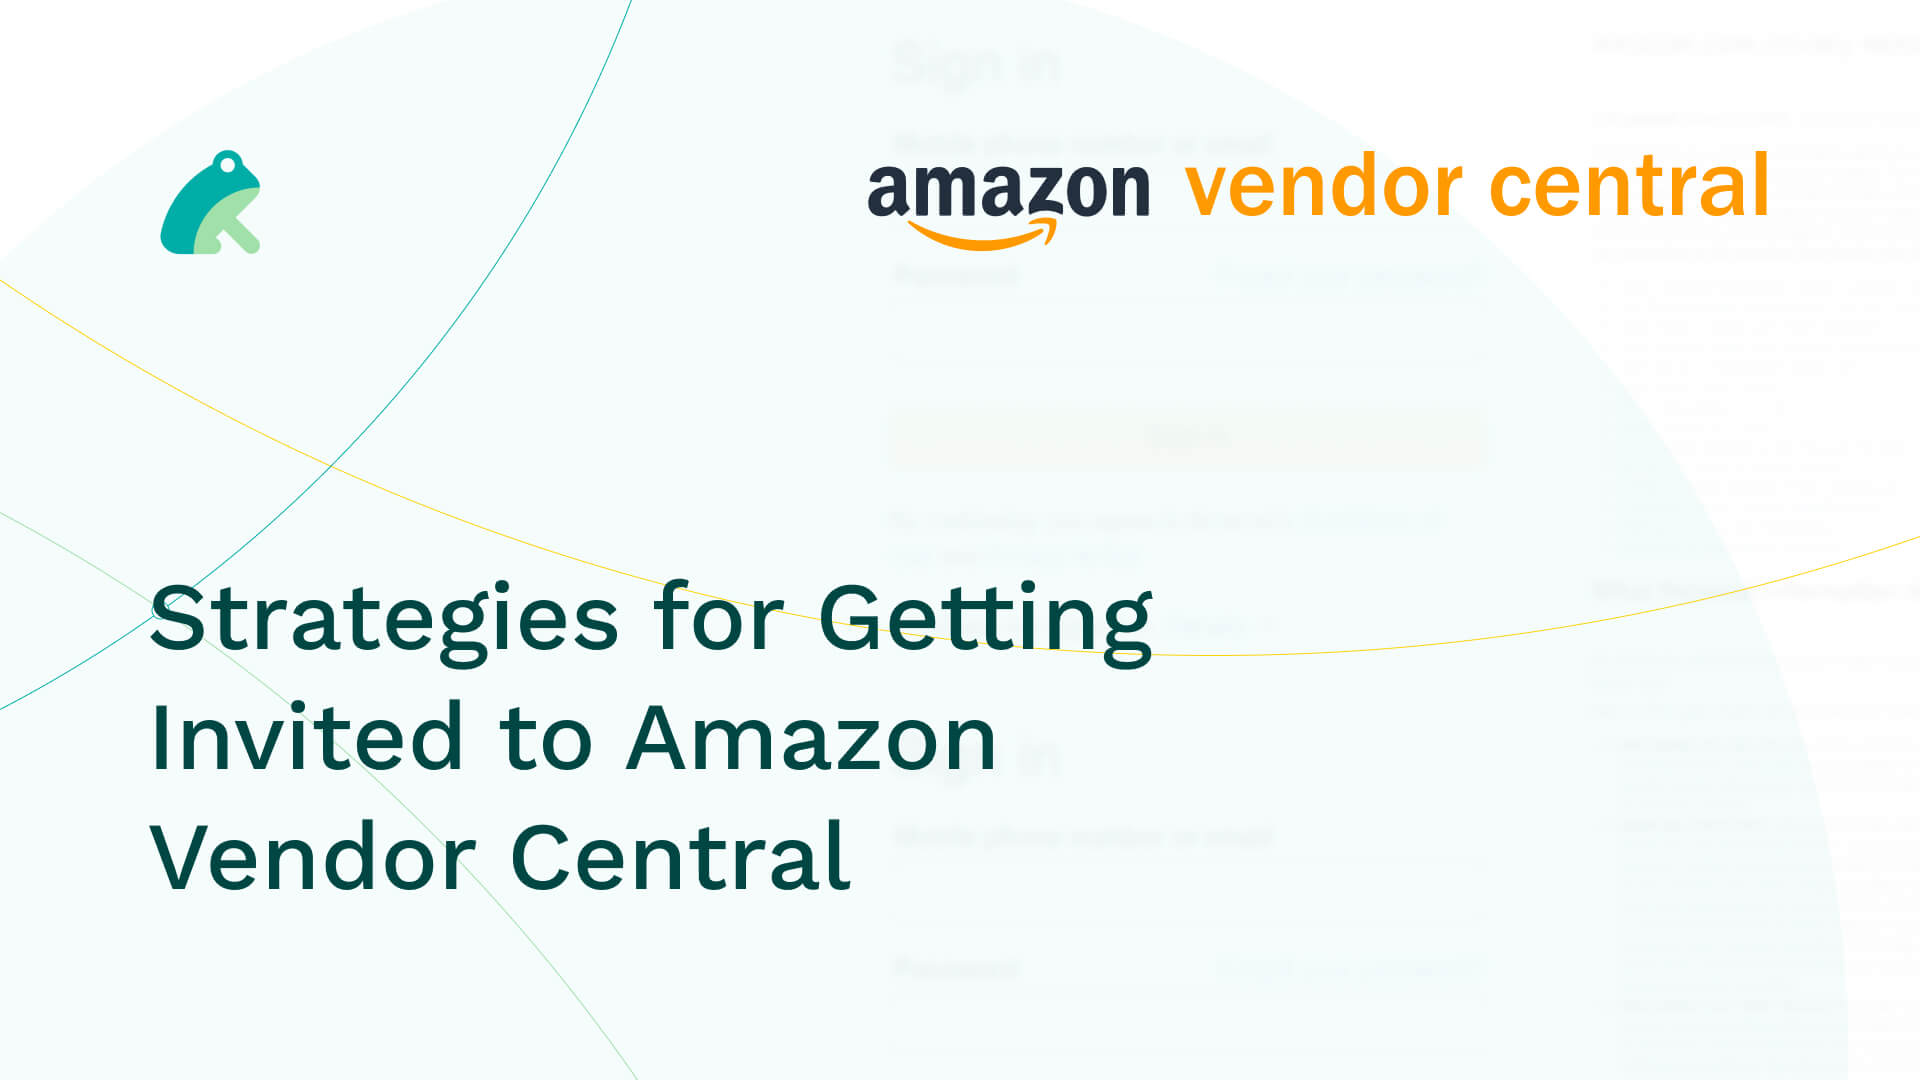 Strategies for Getting Invited to Amazon Vendor Central